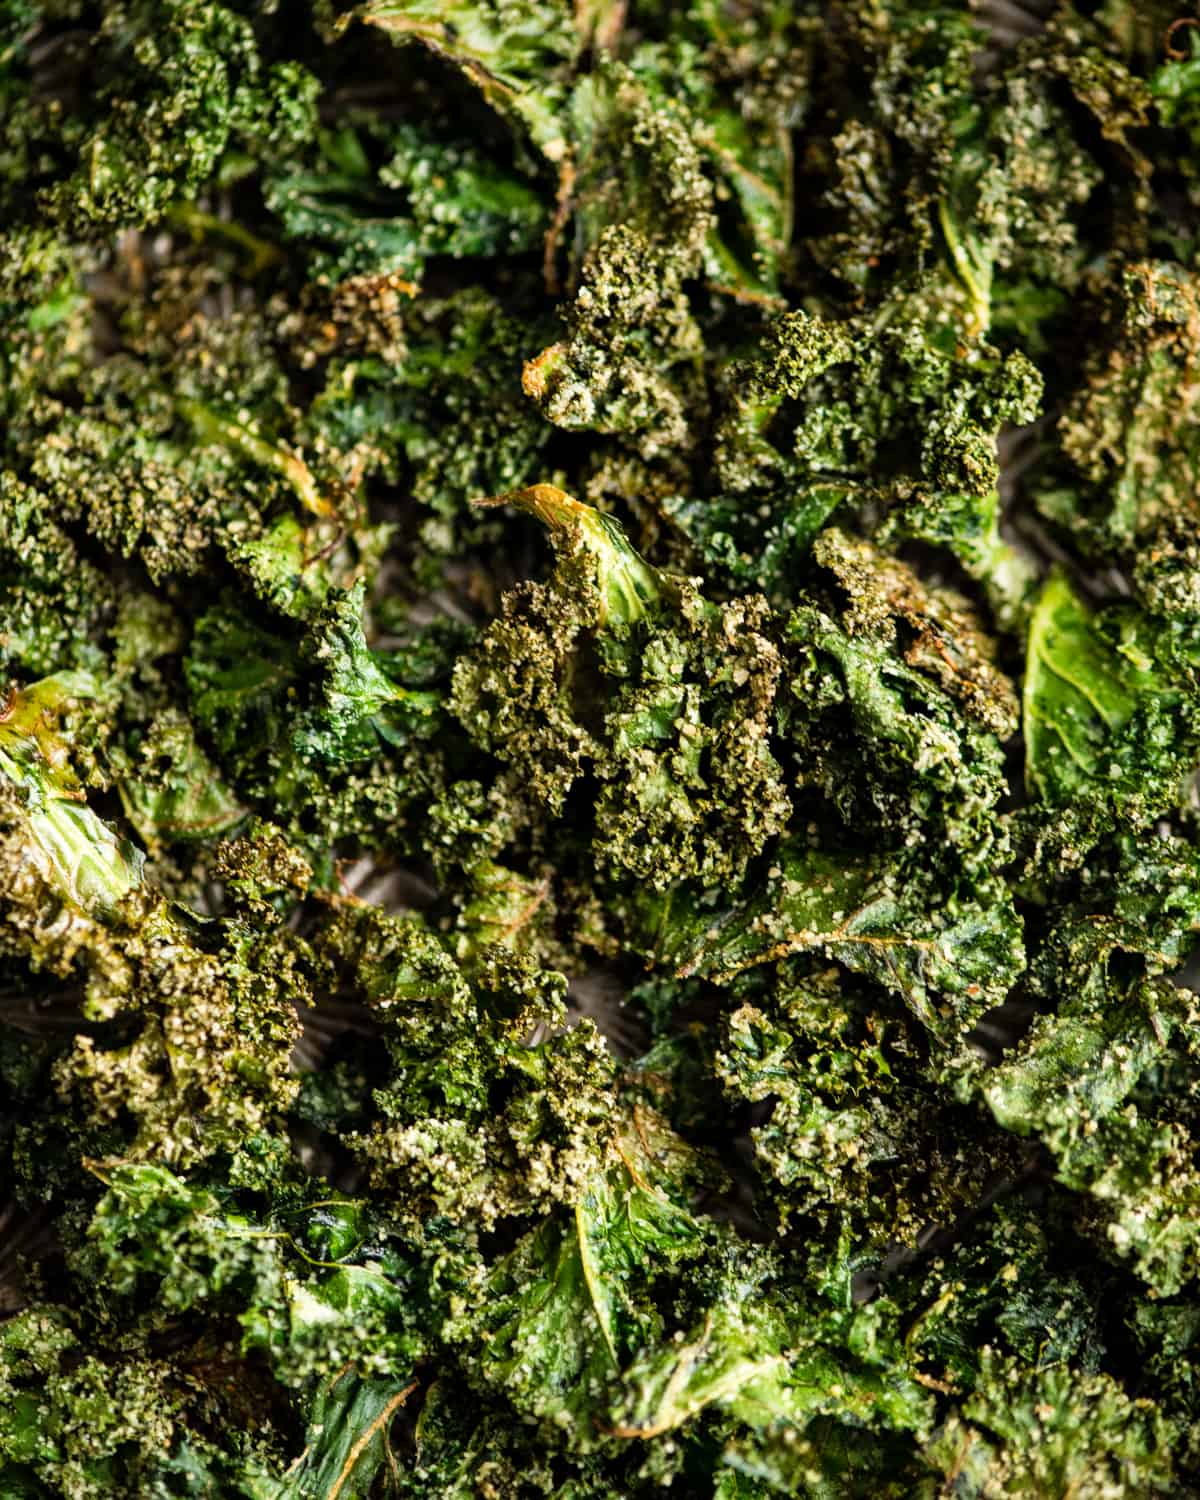 up close overhead view of baked kale chips after baking